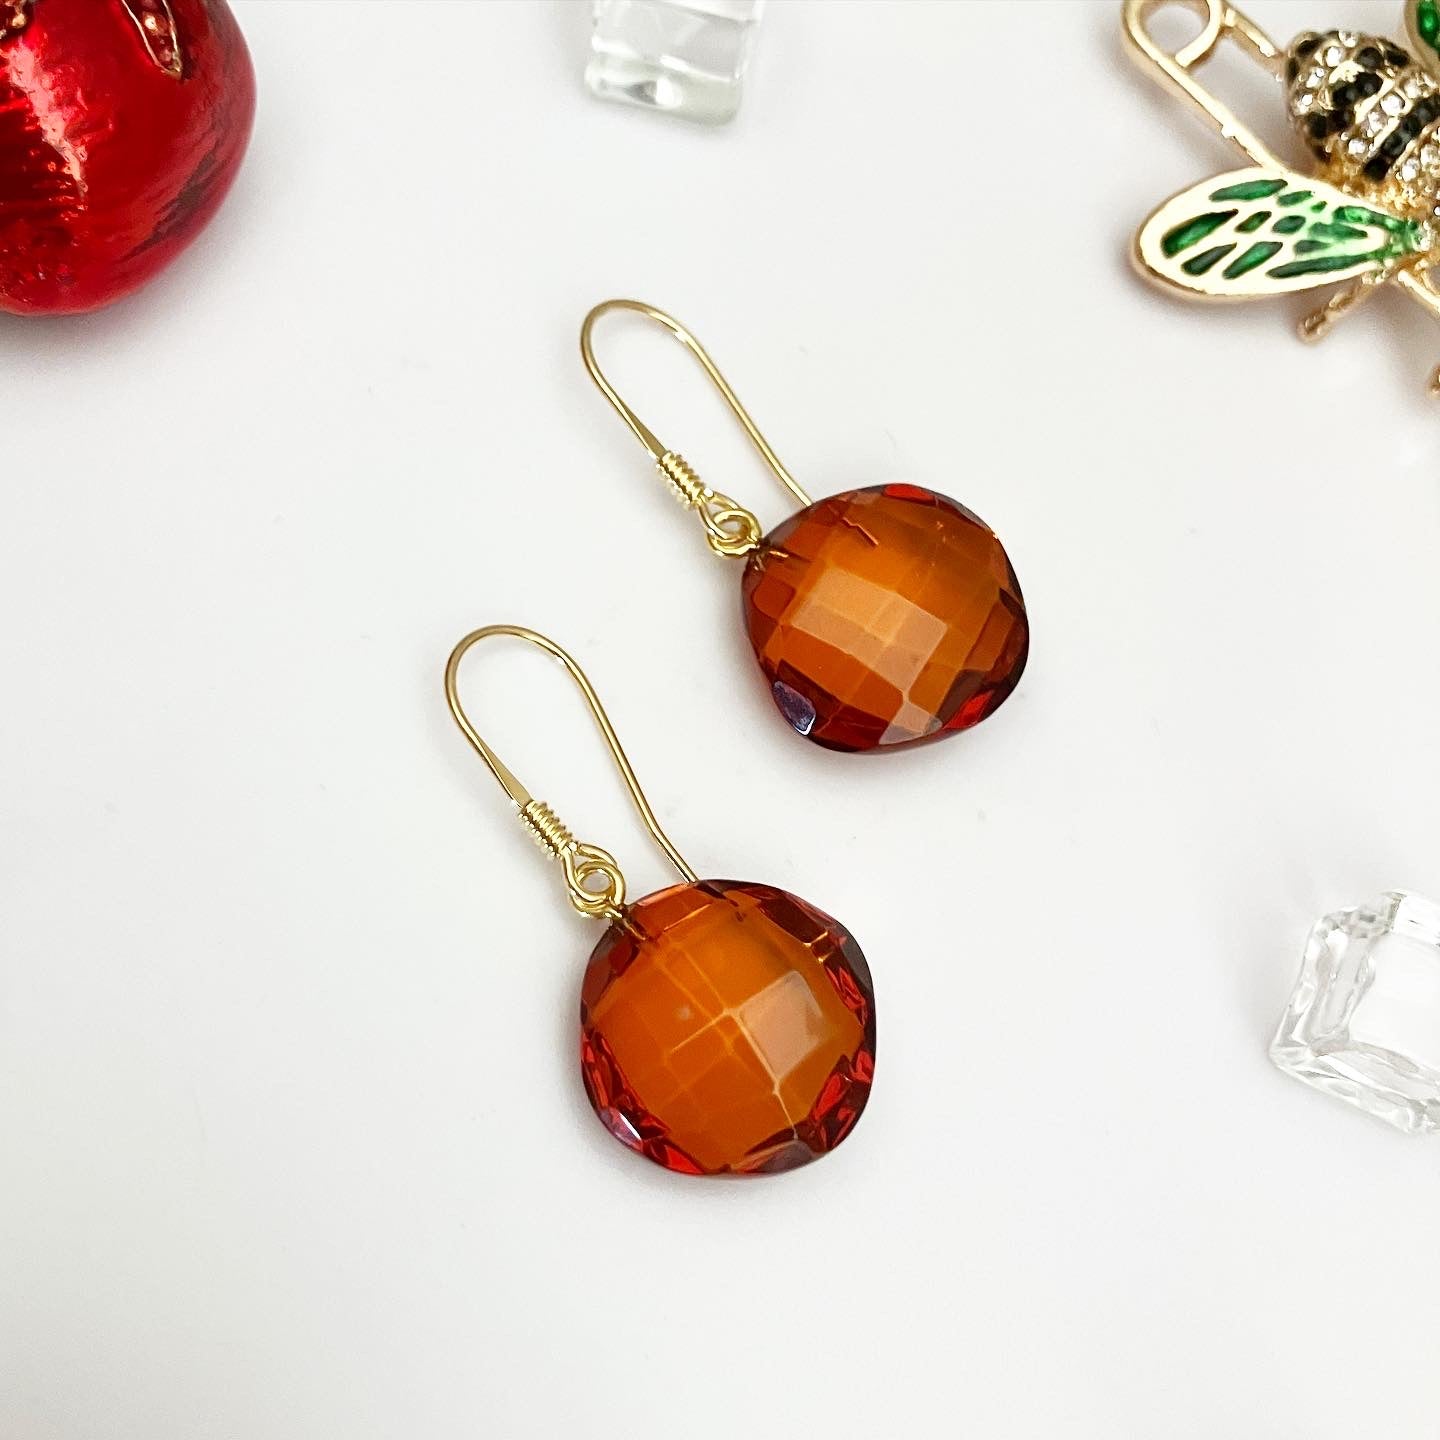 Earrings silver with gilding and natural amber.